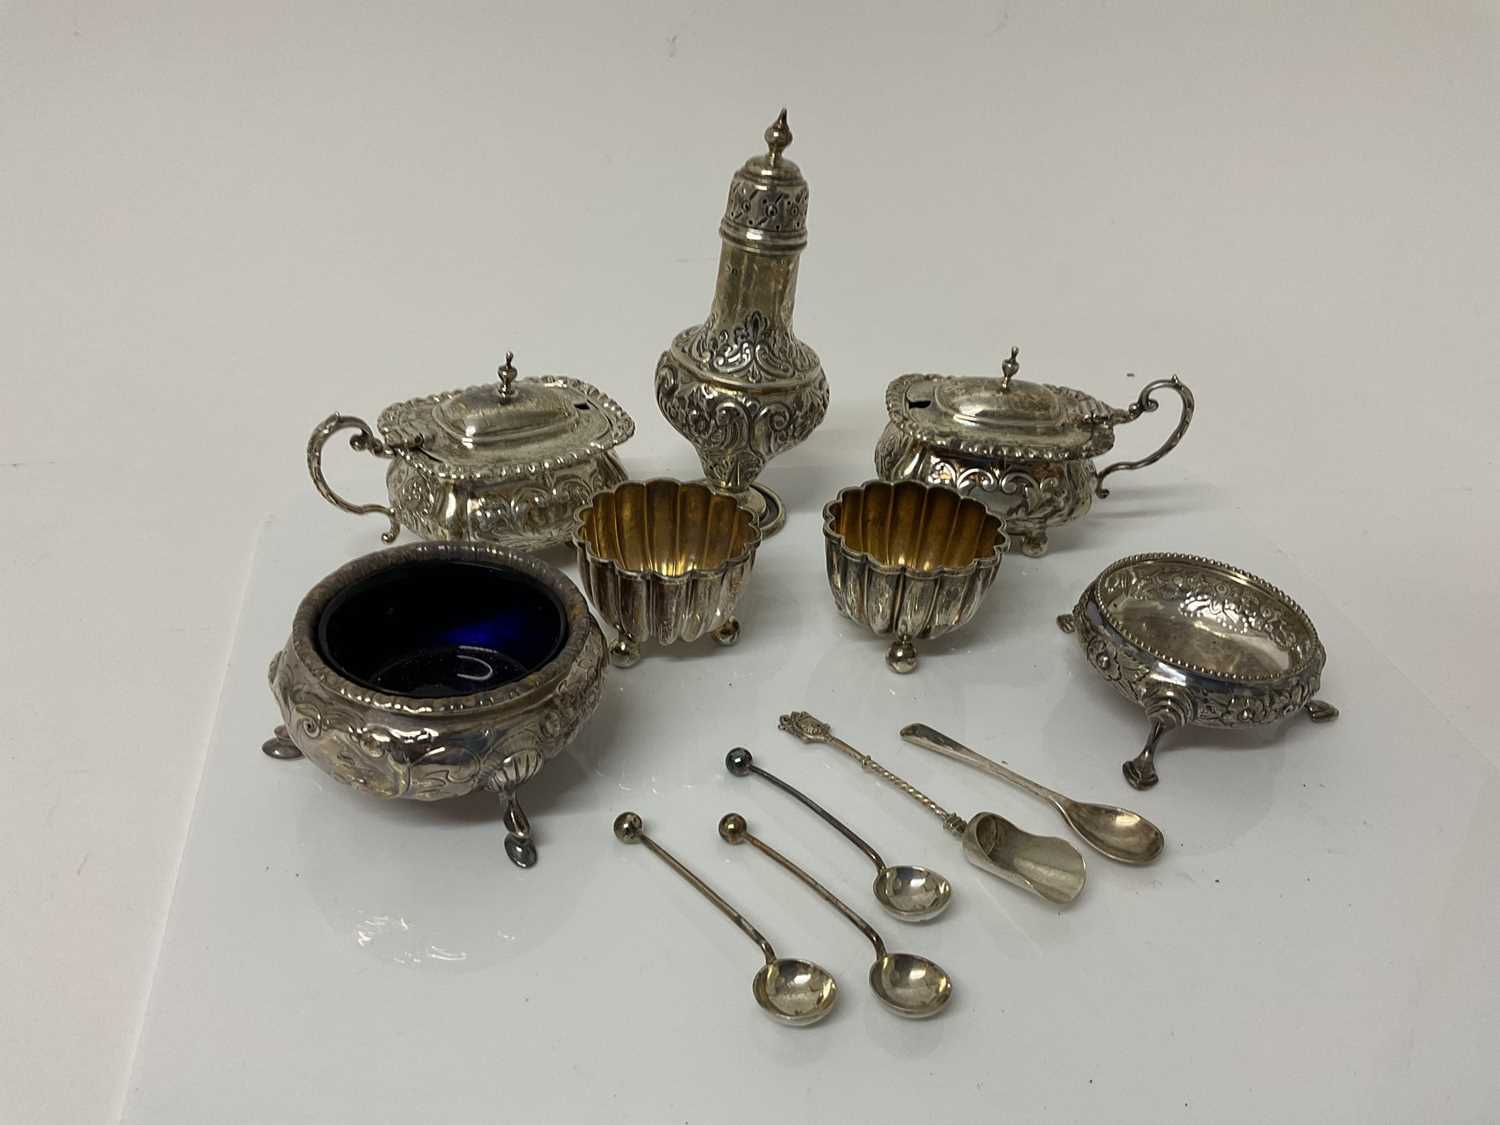 Lot 54 - Pair of Edwardian silver mustard pots with blue glass liners (Birmingham 1905 / 1907), together with an Edwardian silver Pepperette (Birmingham 1908), four silver salt cellars.